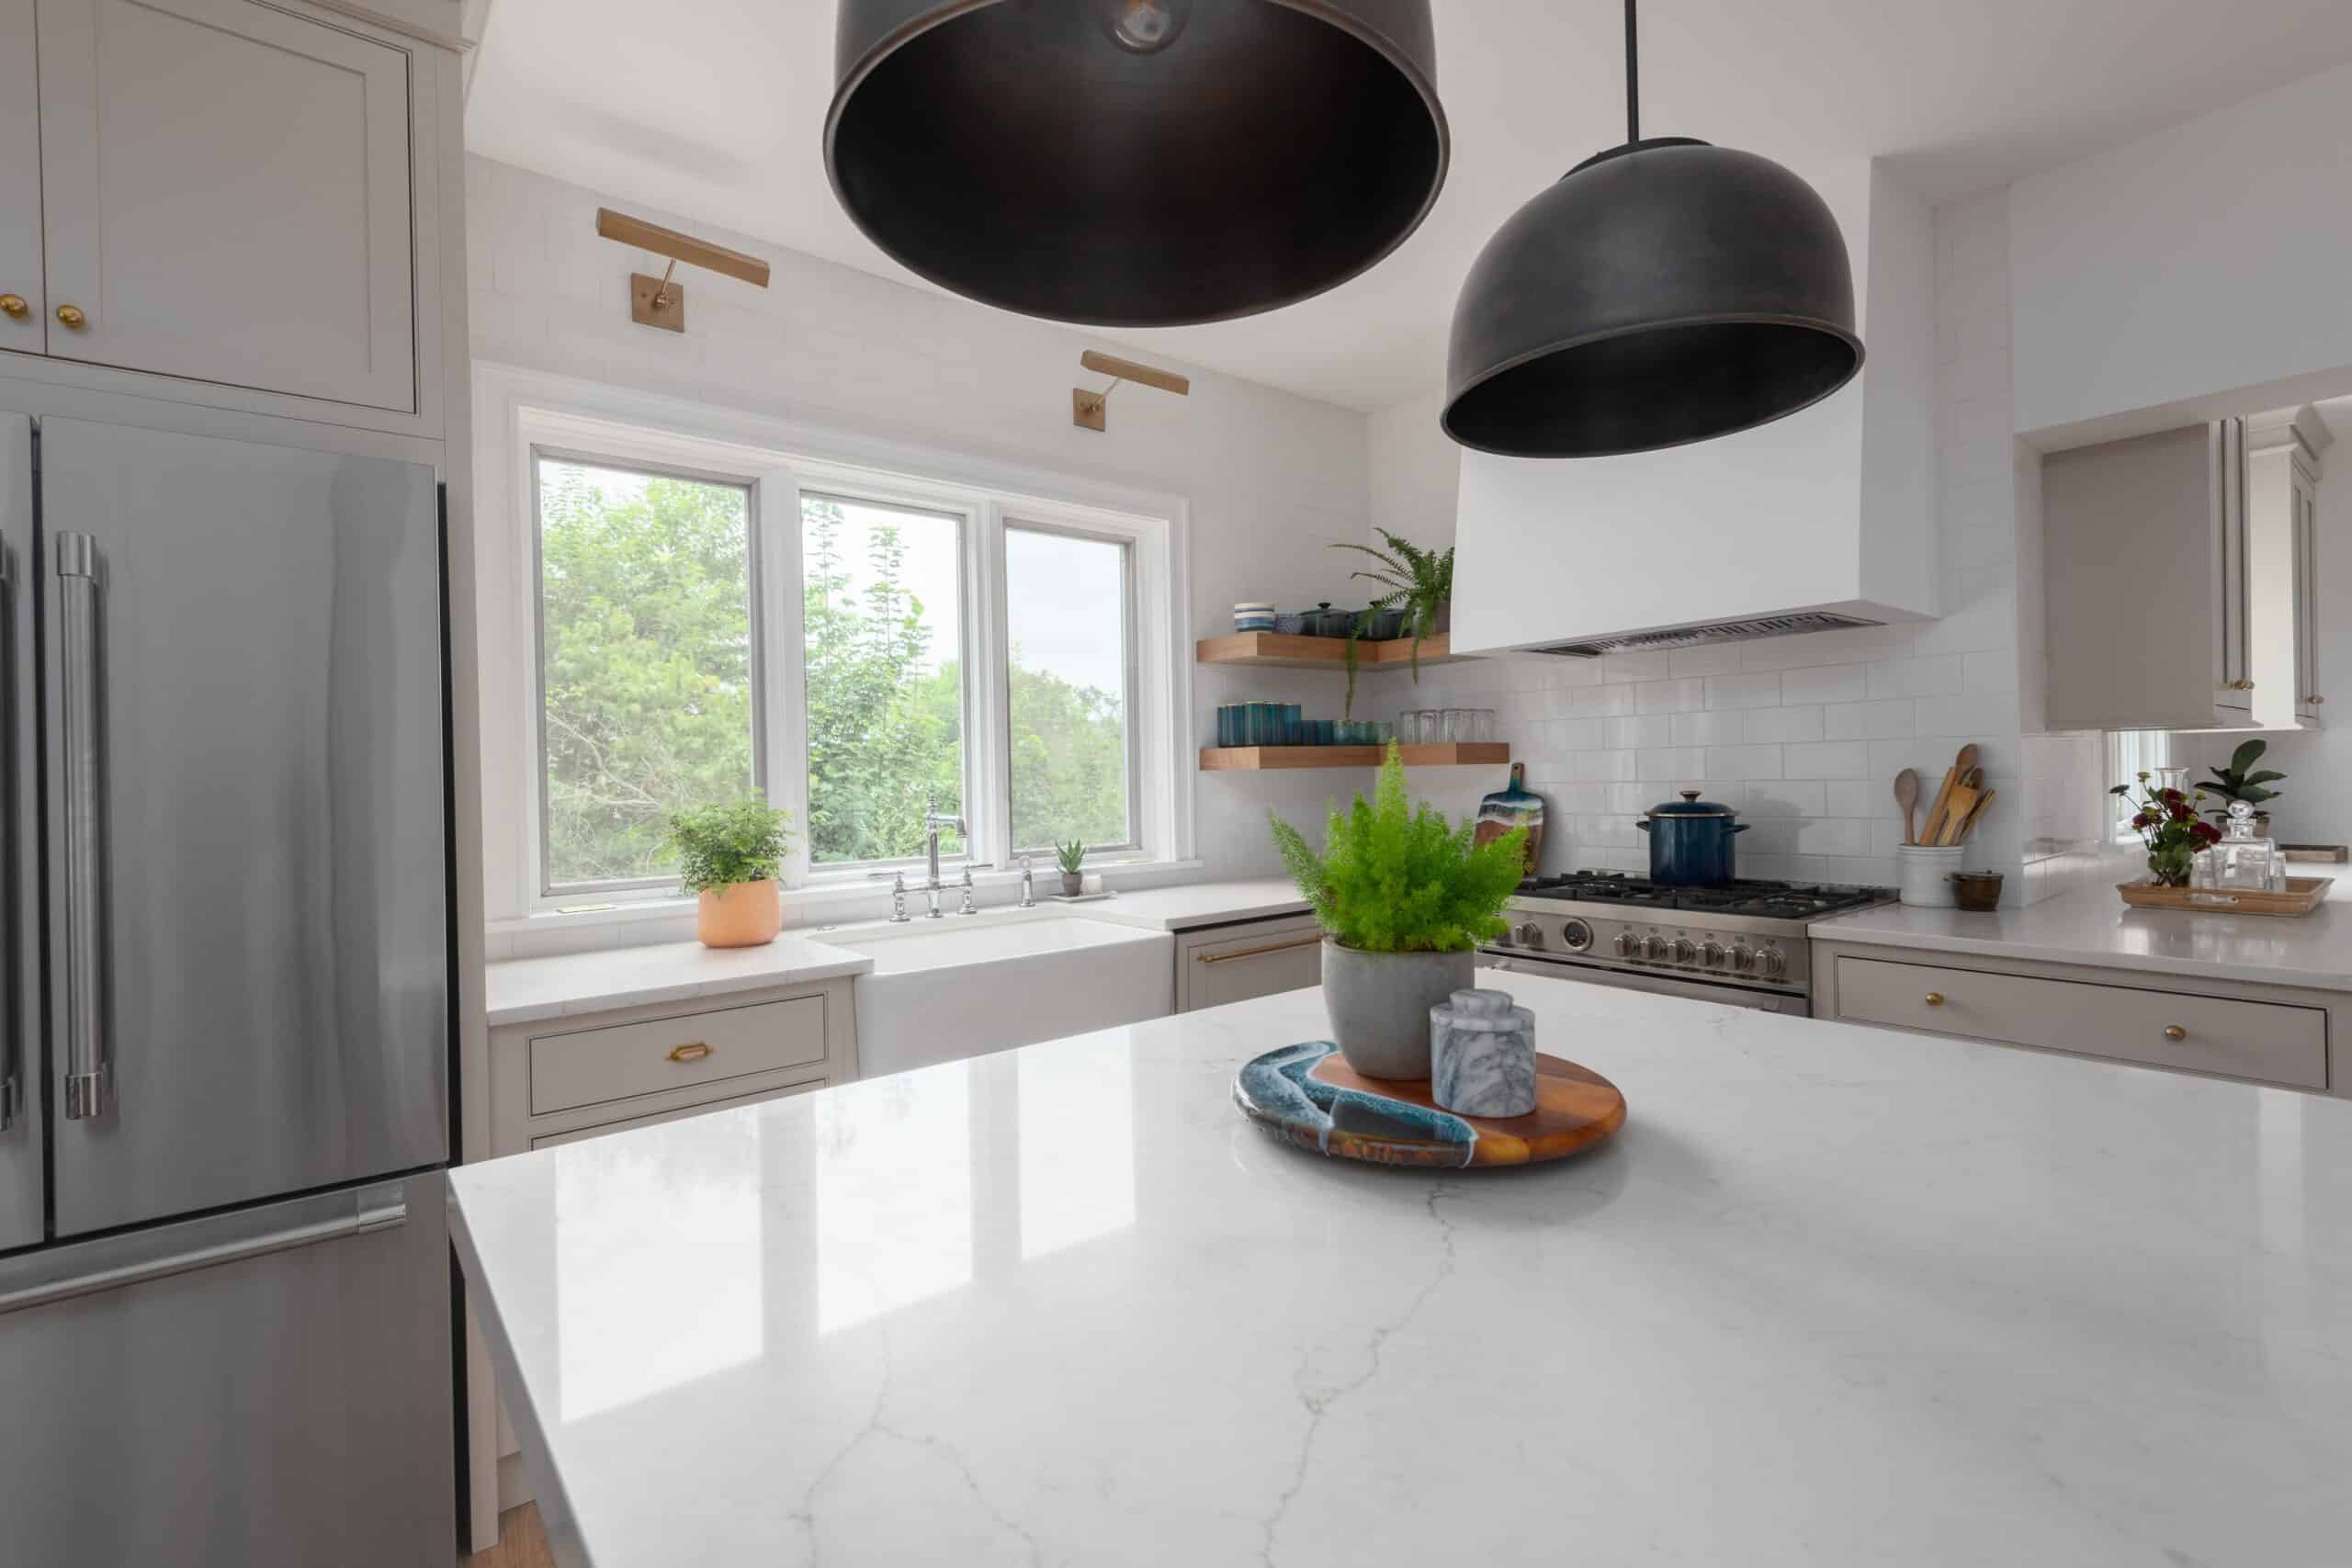 White Countertop with Green Plant Hill & Harbor Design